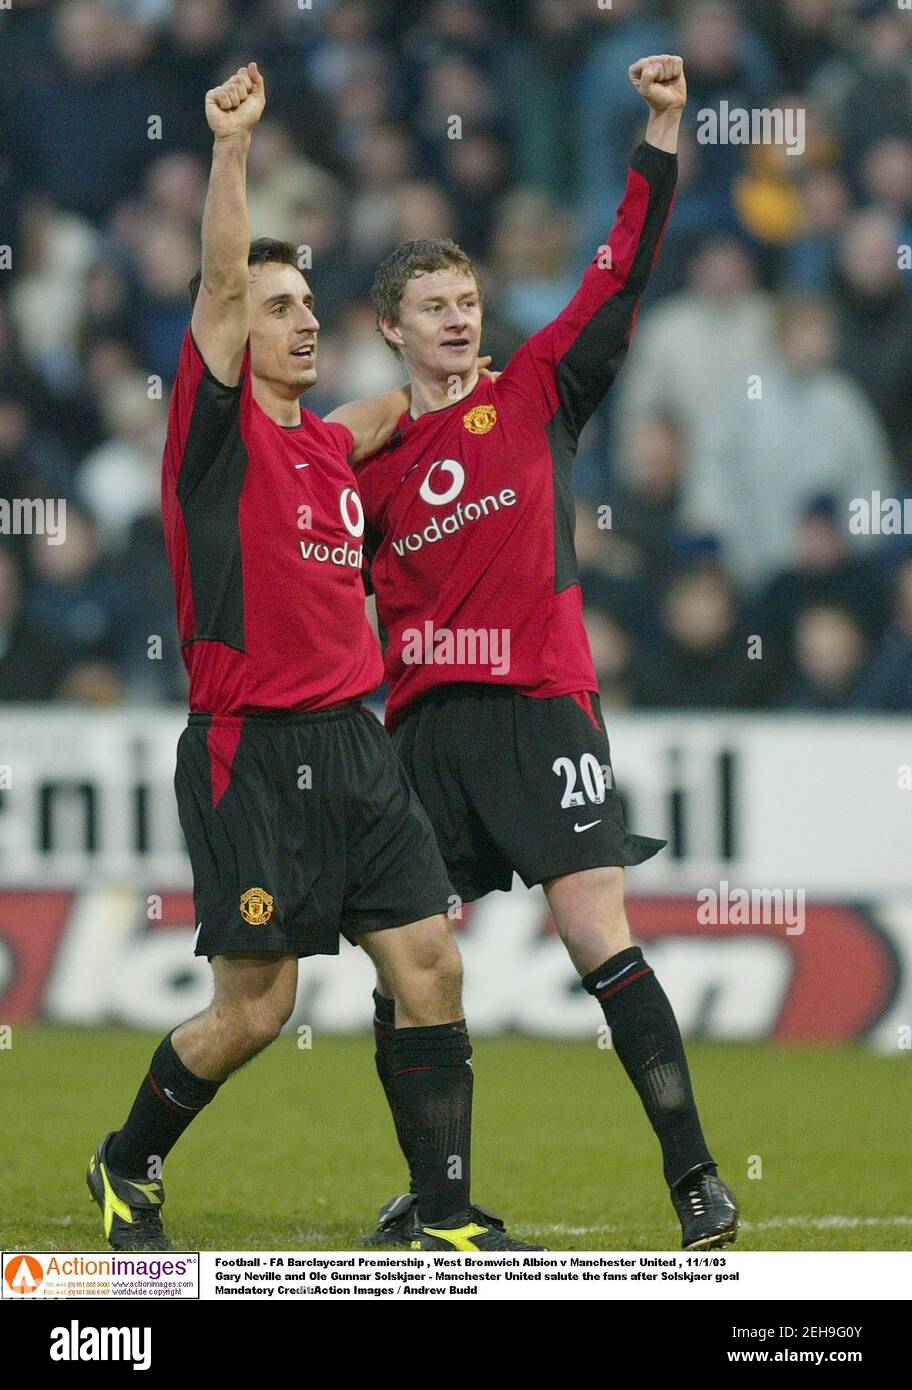 Football - FA Barclaycard Premiership , West Bromwich Albion v Manchester United , 11/1/03  Gary Neville and Ole Gunnar Solskjaer - Manchester United salute the fans after Solskjaer goal  Mandatory Credit:Action Images / Andrew Budd Stock Photo